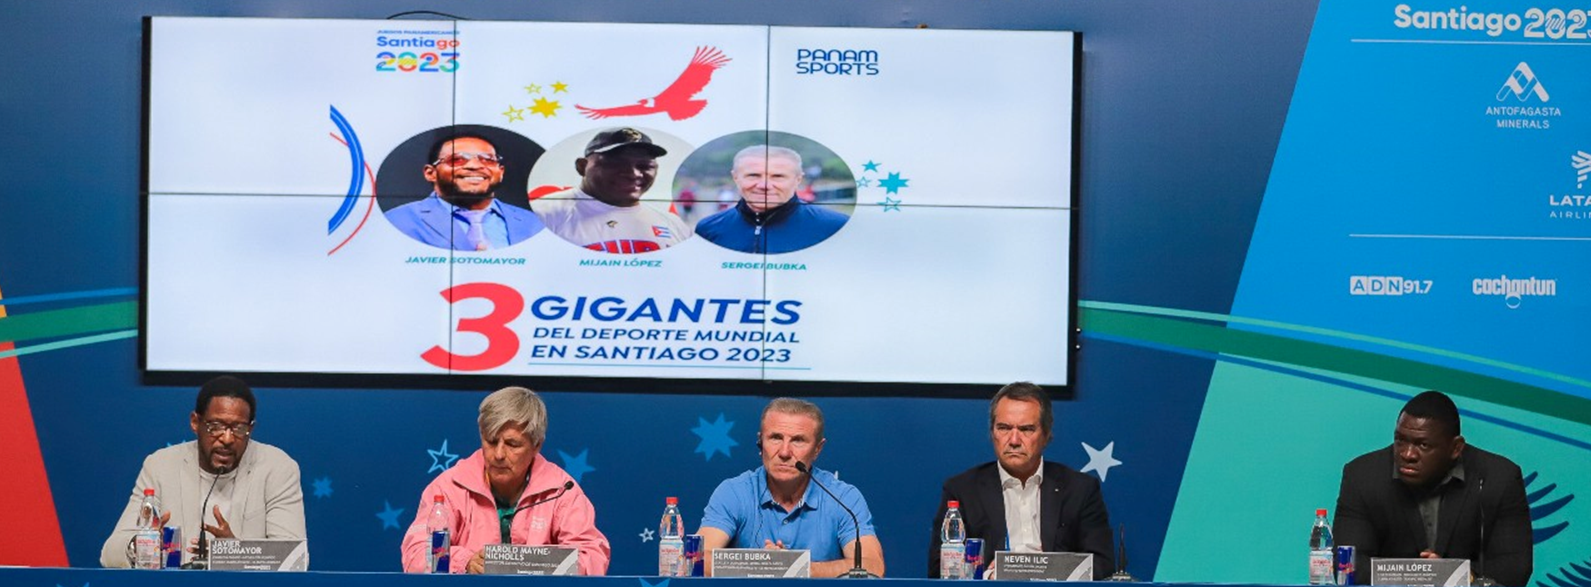 Ukraine's IOC member Sergey Bubka, centre, backed suggestions of a future Olympics for Chile during a Pan American Games press conference at Santiago 2023 ©Panam Sports